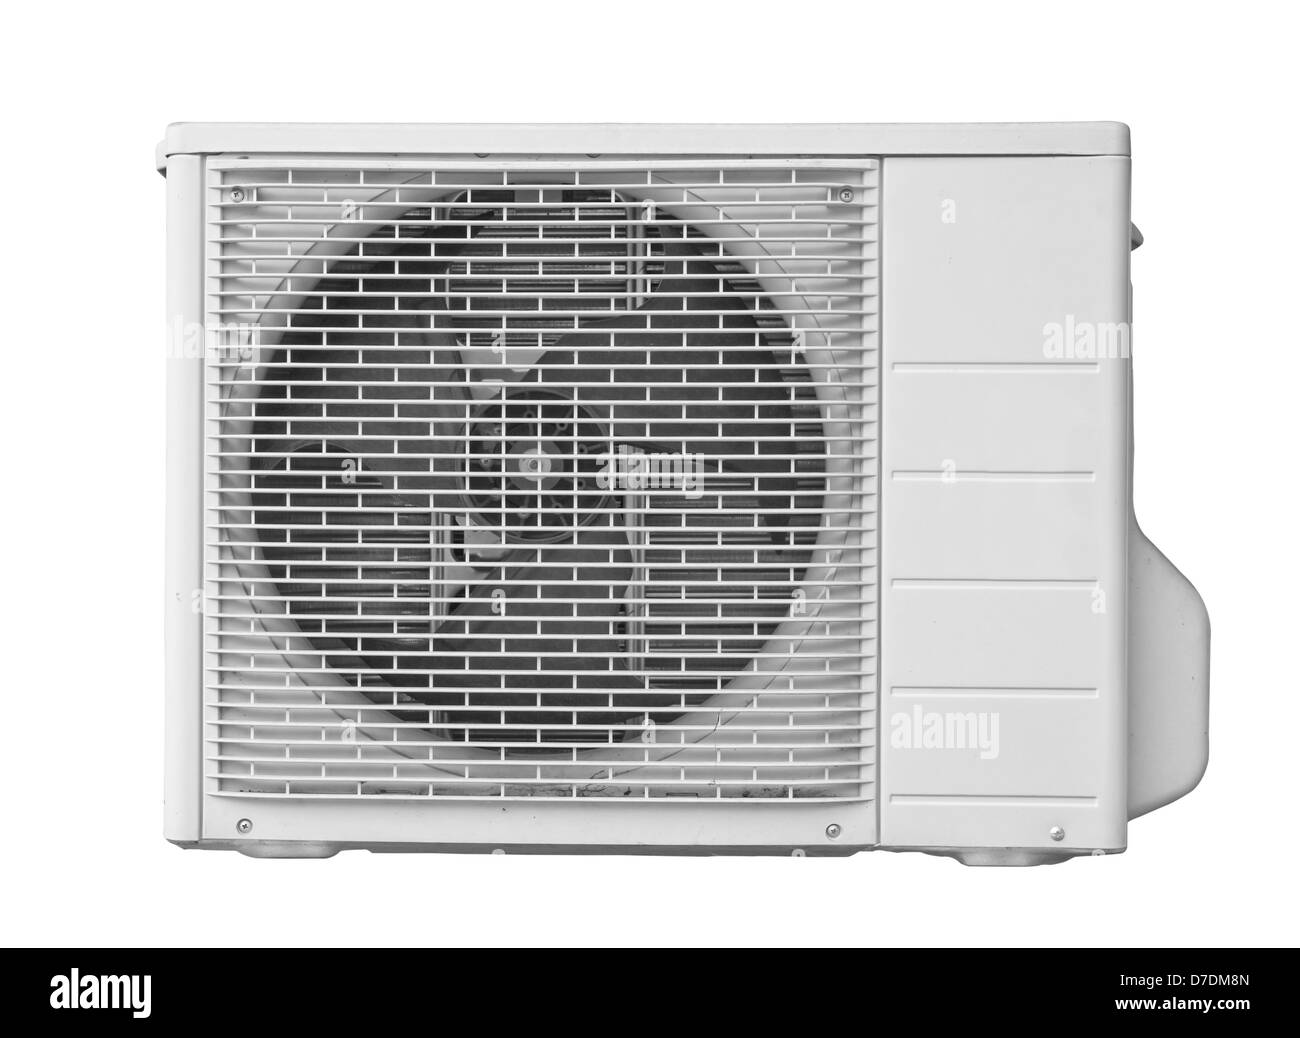 Air conditioner isolate on white background Stock Photo